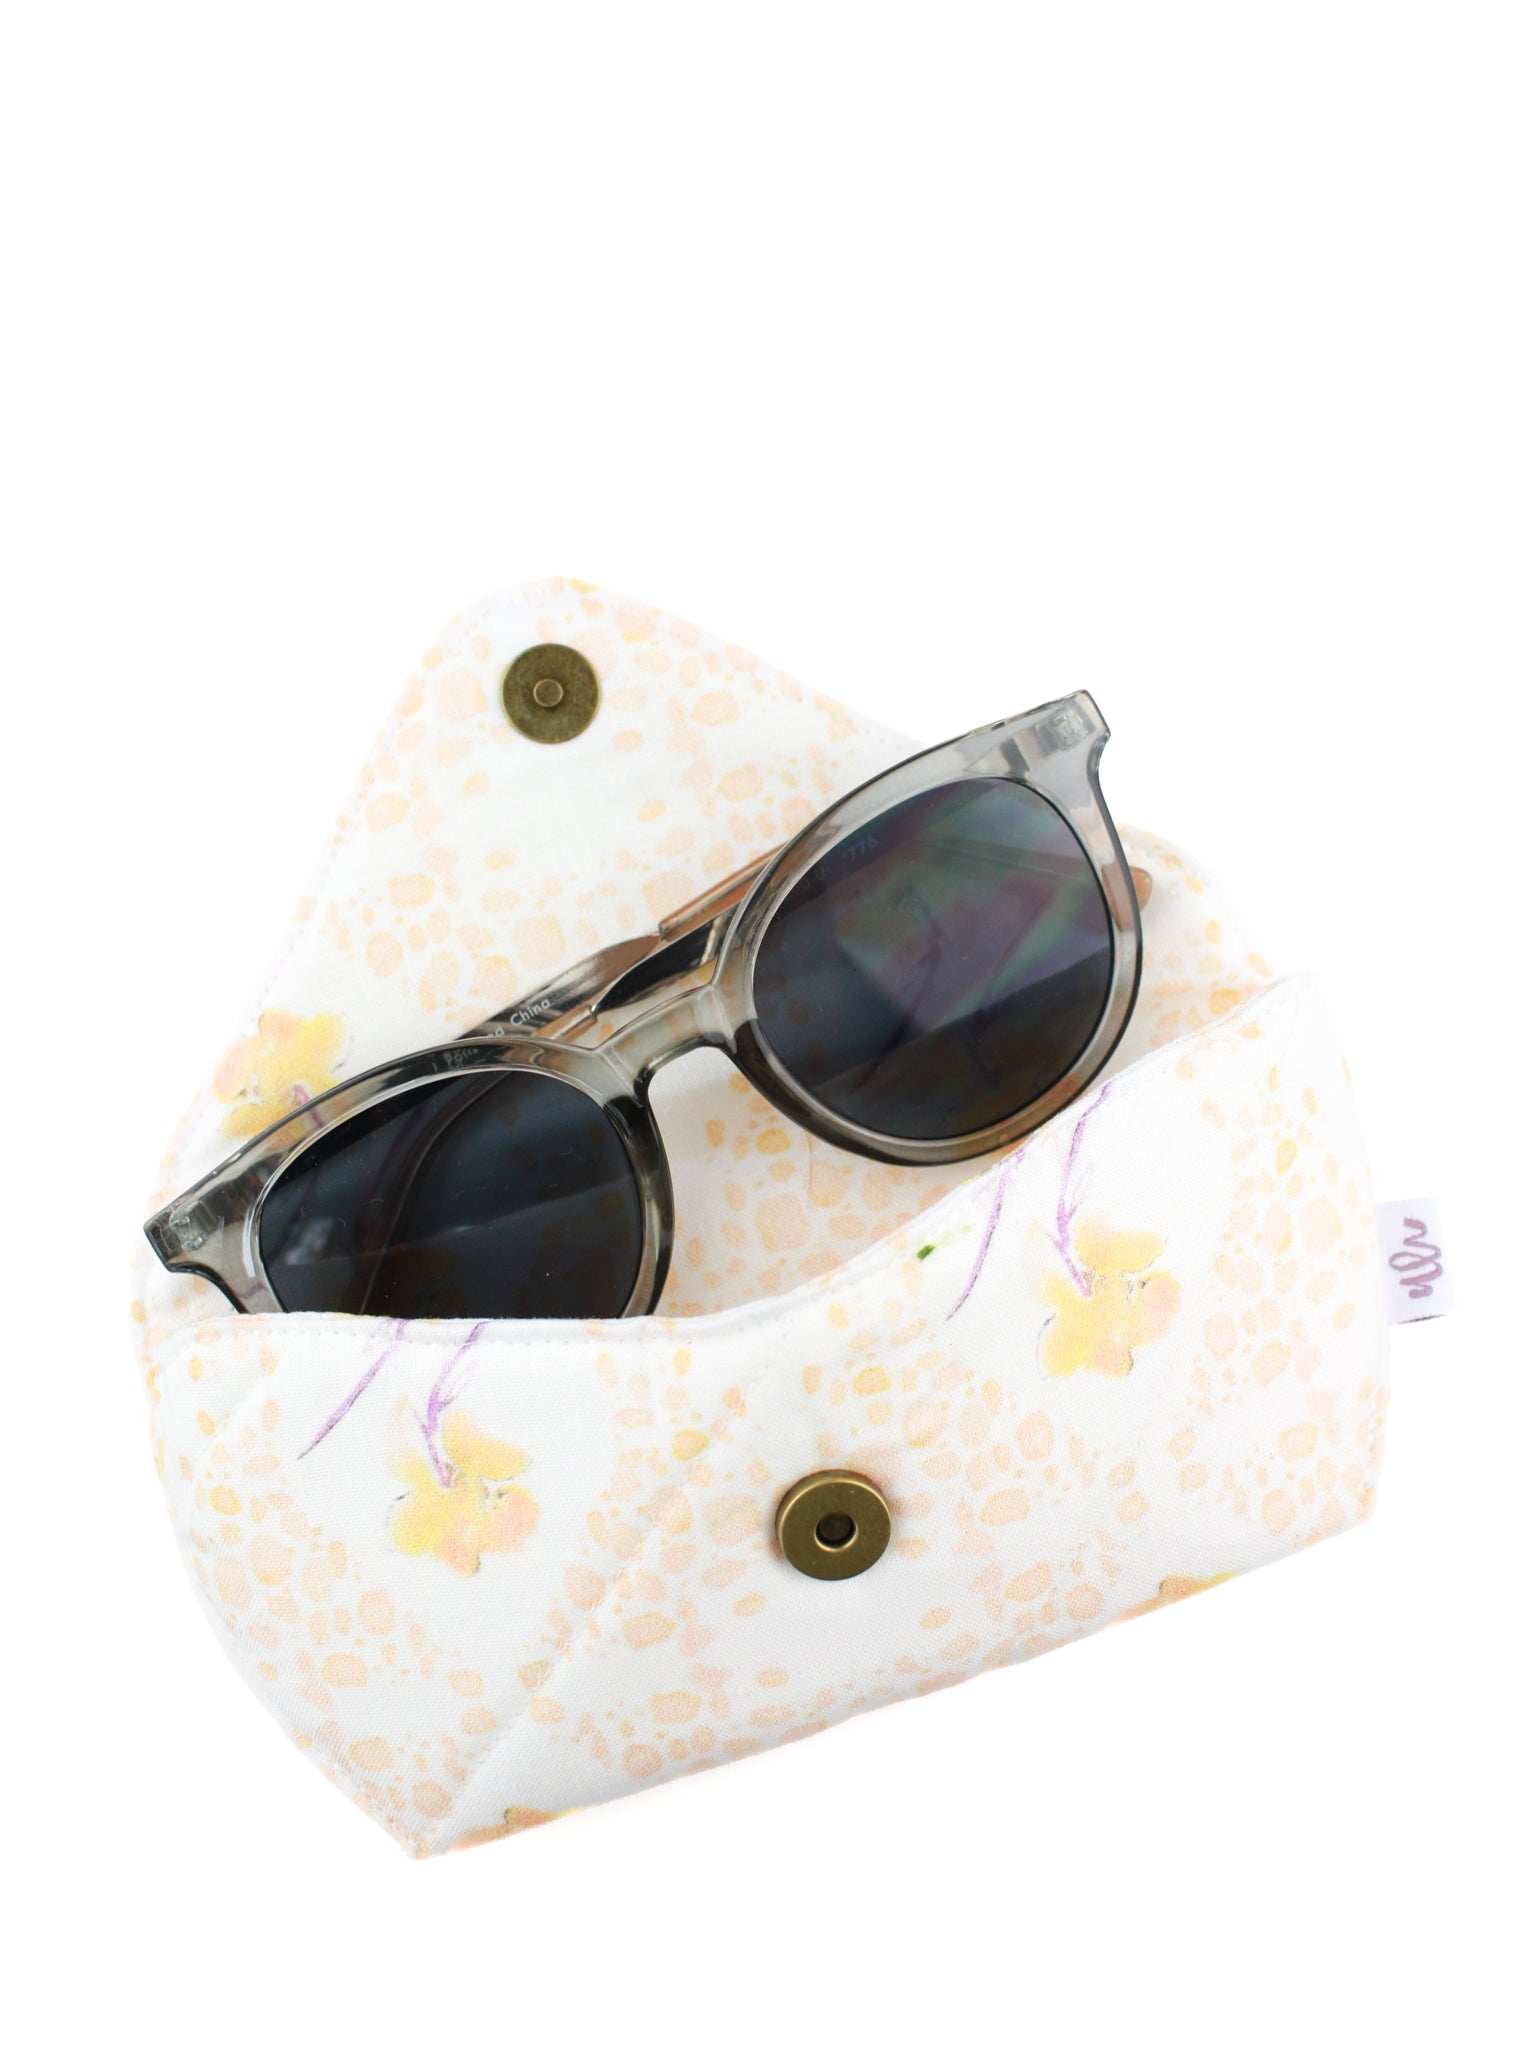 Sun-washed Sunnies Case in Pearl